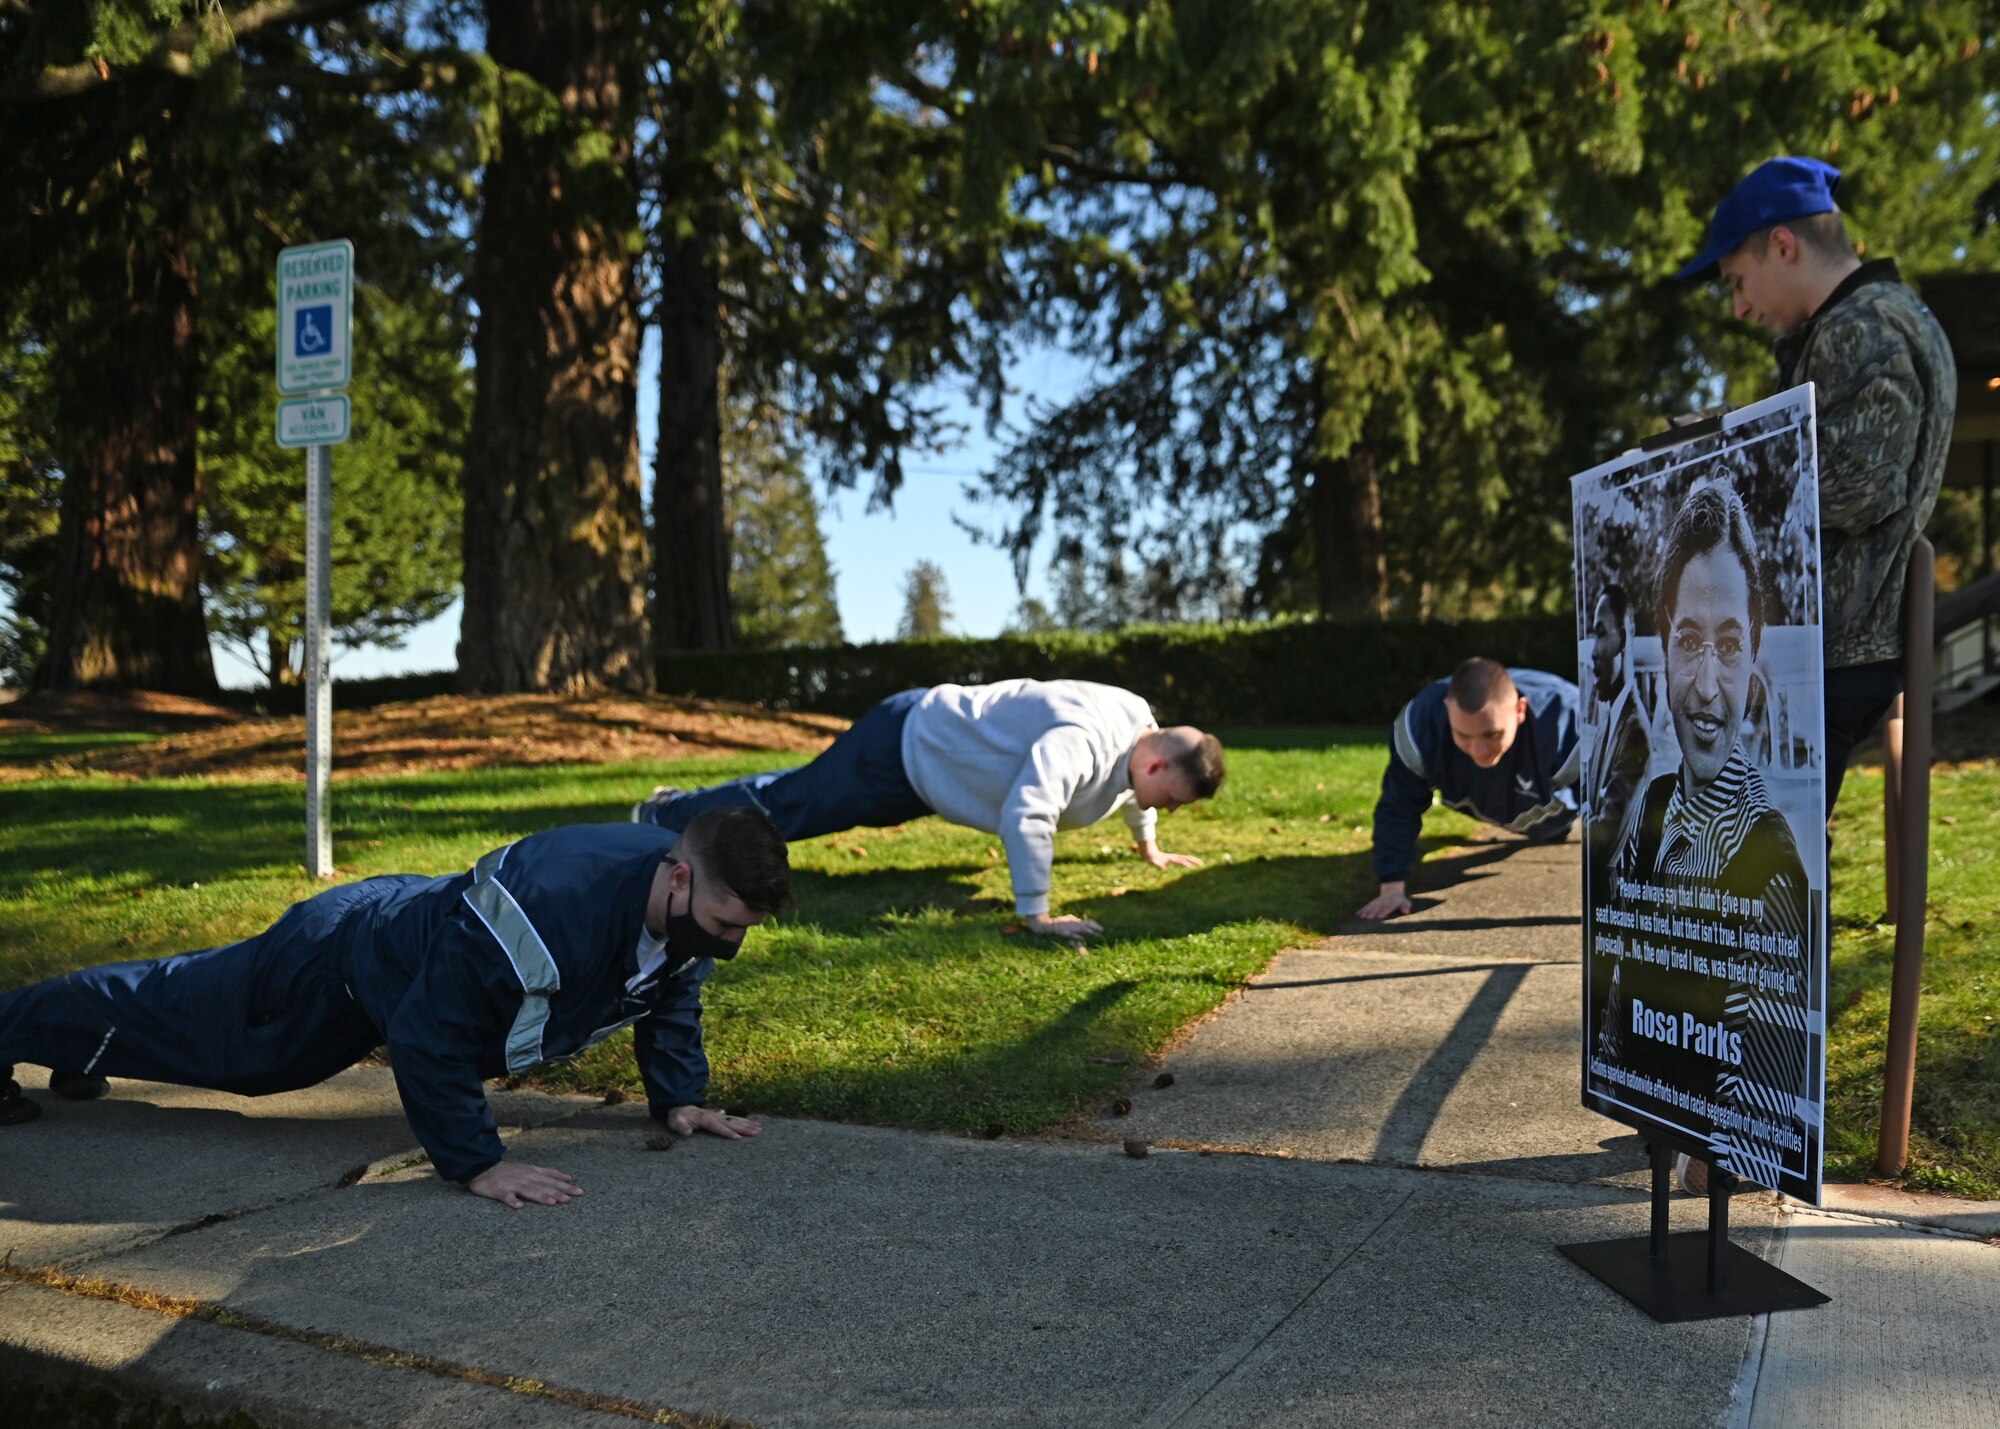 U.S. Airmen with the McChord Field Honor Guard do push ups during the Black History Month Amazing Race event at Joint Base Lewis-McChord, Washington, Feb. 23, 2022. The Amazing Race is one of Team McChord’s Black History Month timed events, where teams must answer historic questions correctly before they receive the clue to their next stop along the run. (U.S. Air Force photo by Airman 1st Class Callie Norton)